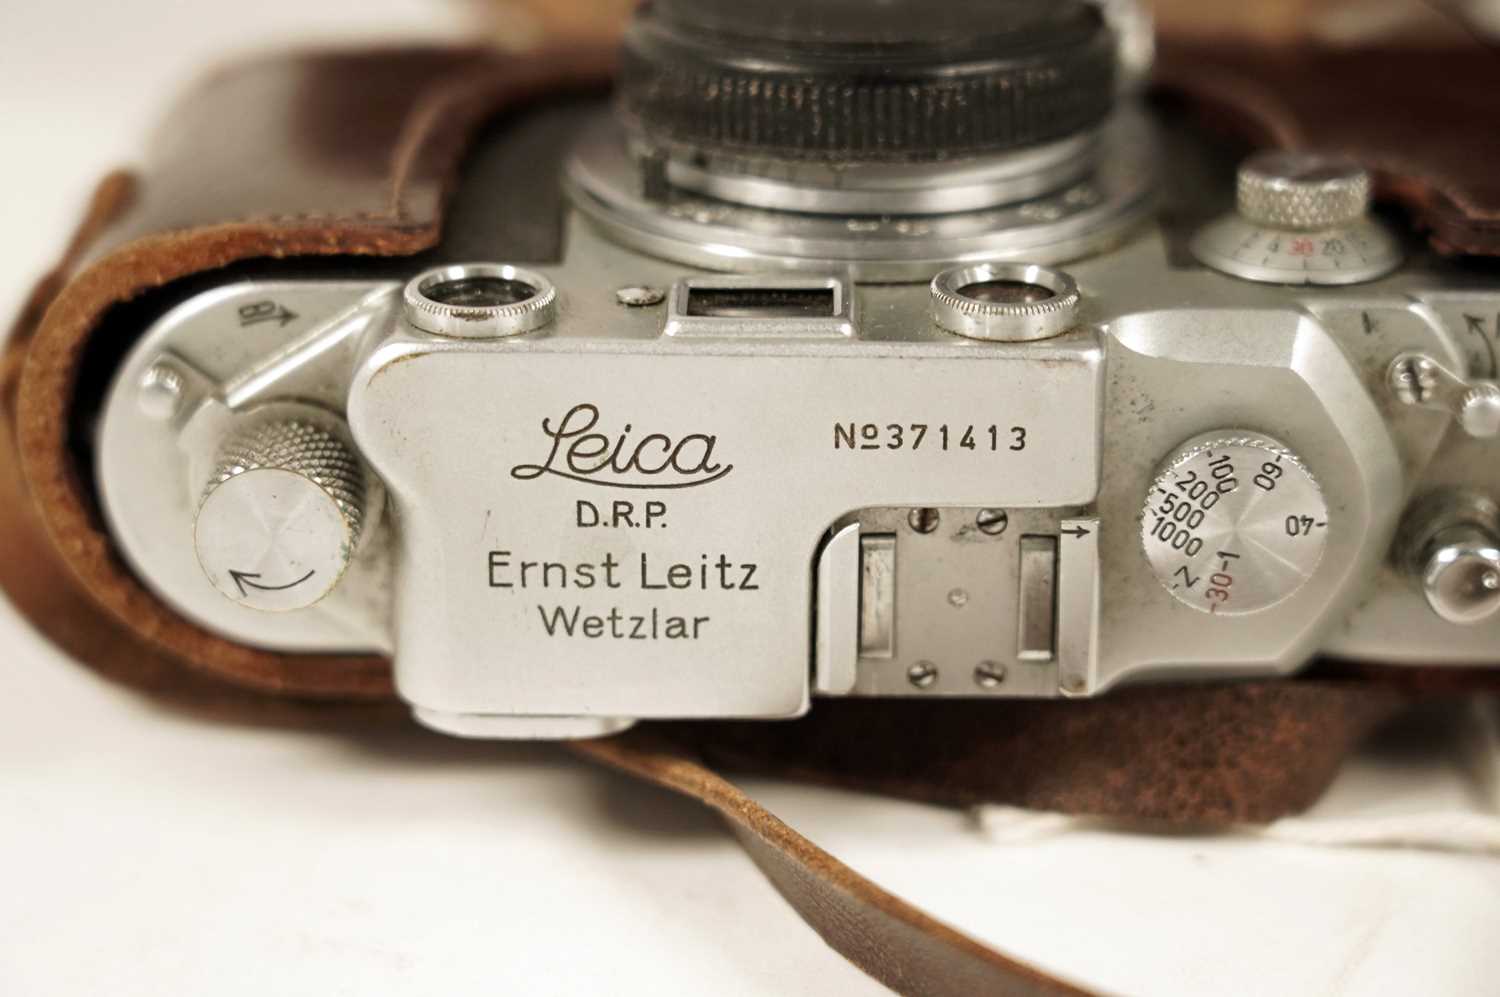 A Leica IIIc rangefinder camera, and other Leica/Leitz accessories - Image 3 of 6